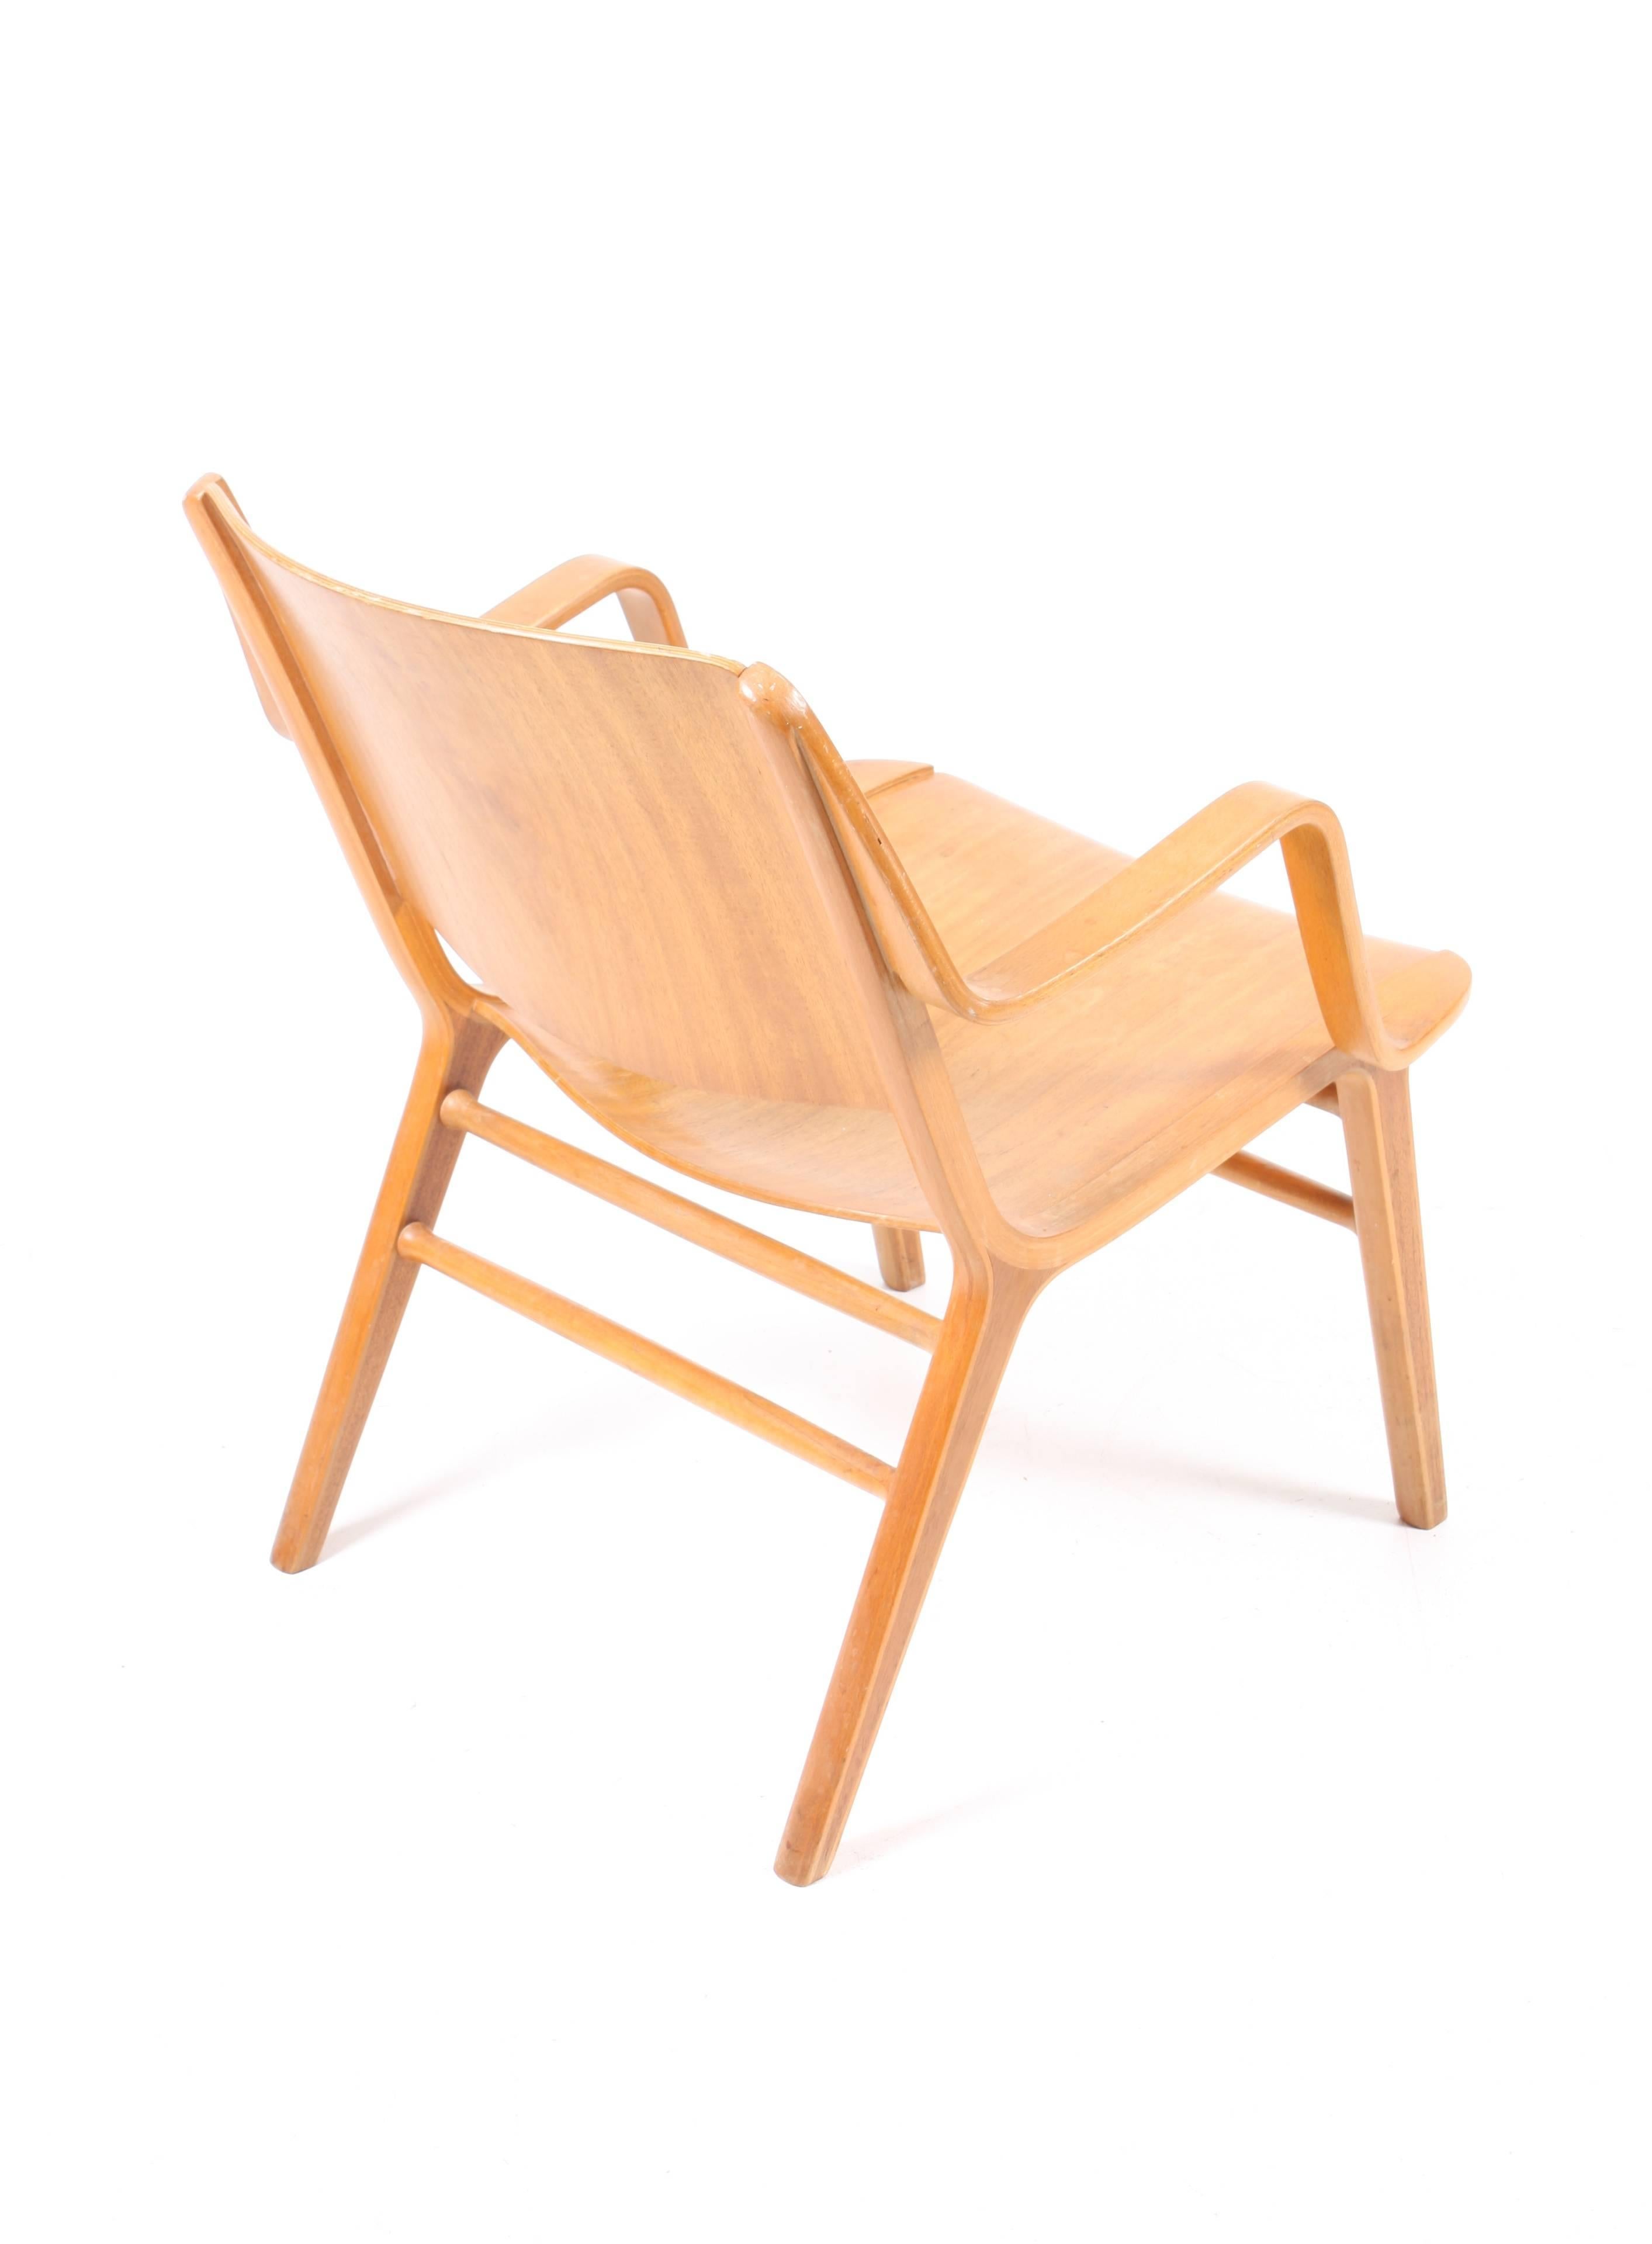 Mid-20th Century Ax Lounge Chair by Hvidt & Mølgaard